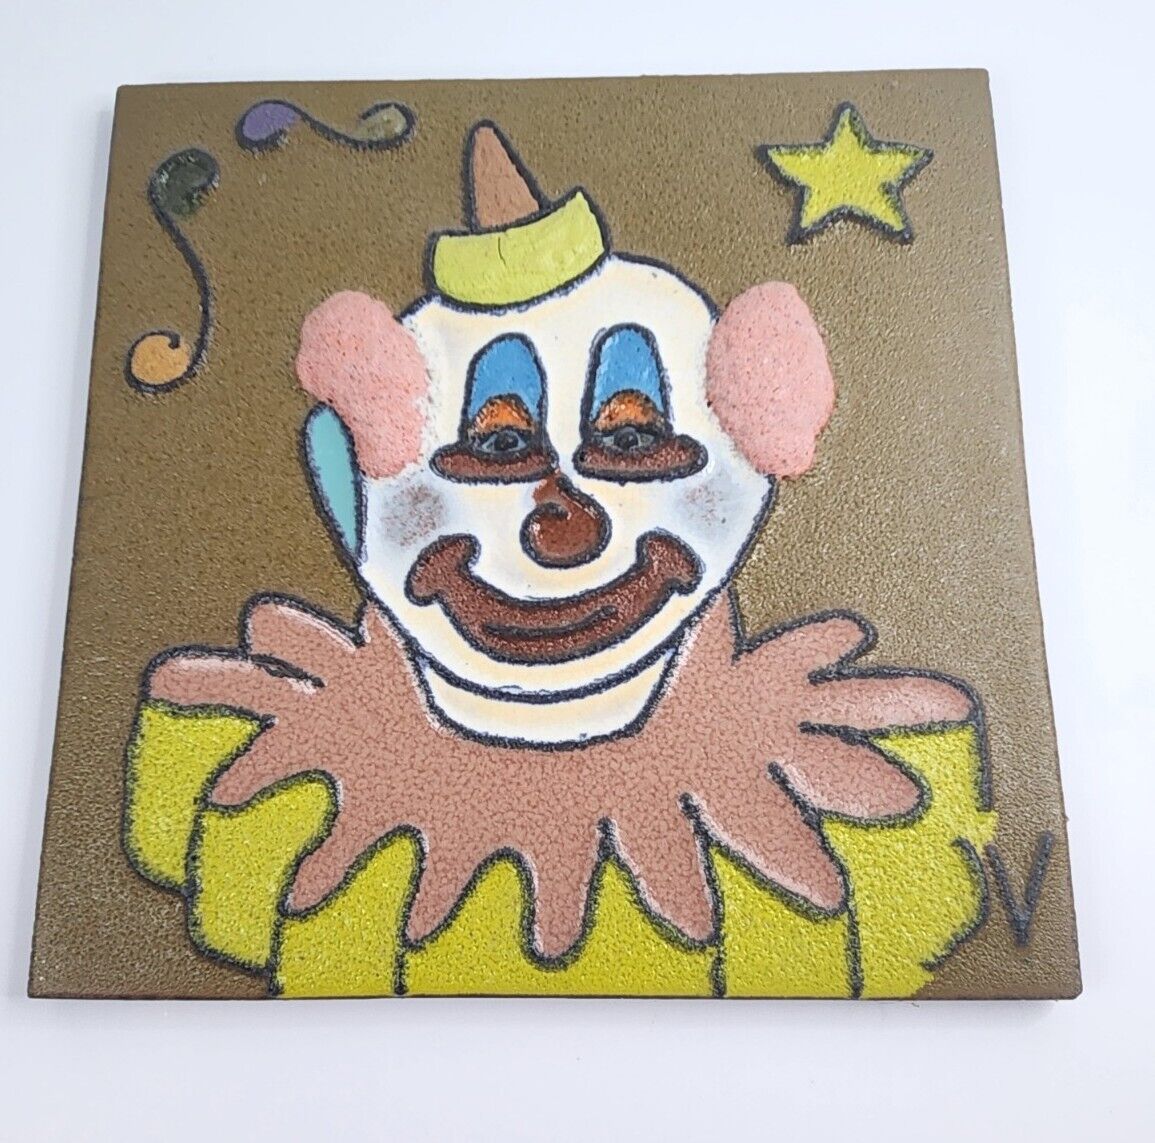 Vintage Clown FRANSISCAN Interpace Terra Tile Large Mid Century Floor USA MADE